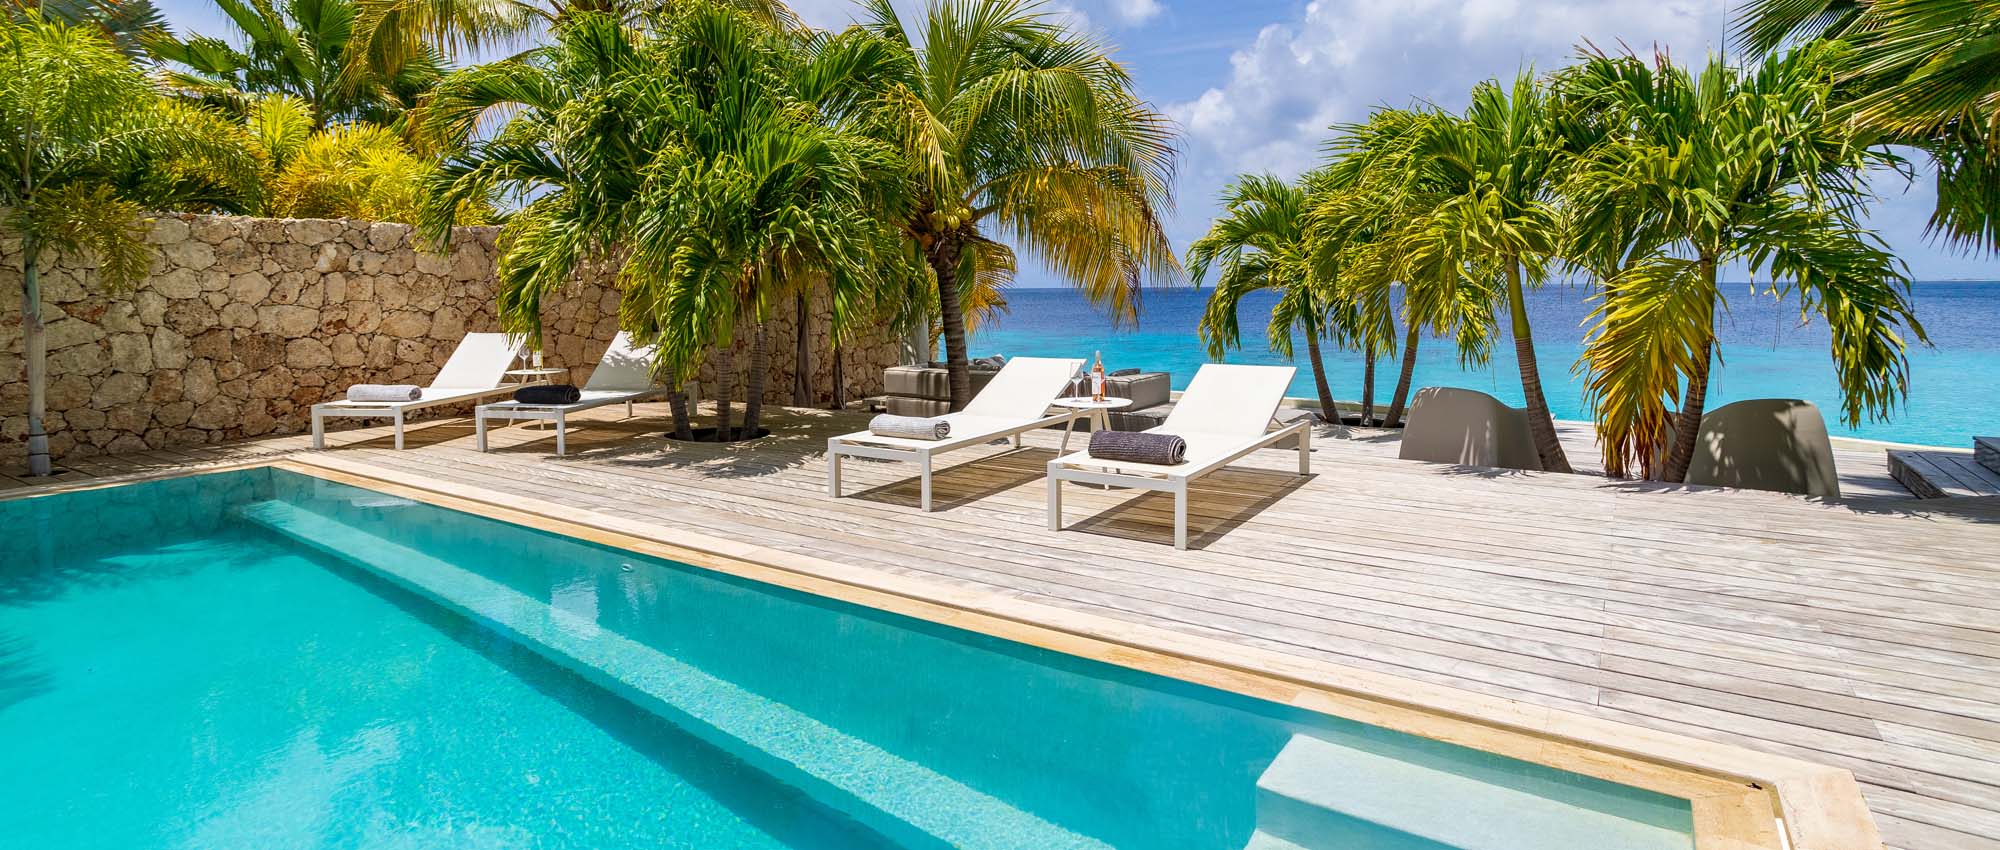 Outdoor pool area with sun lounge chairs and palm trees by the ocean